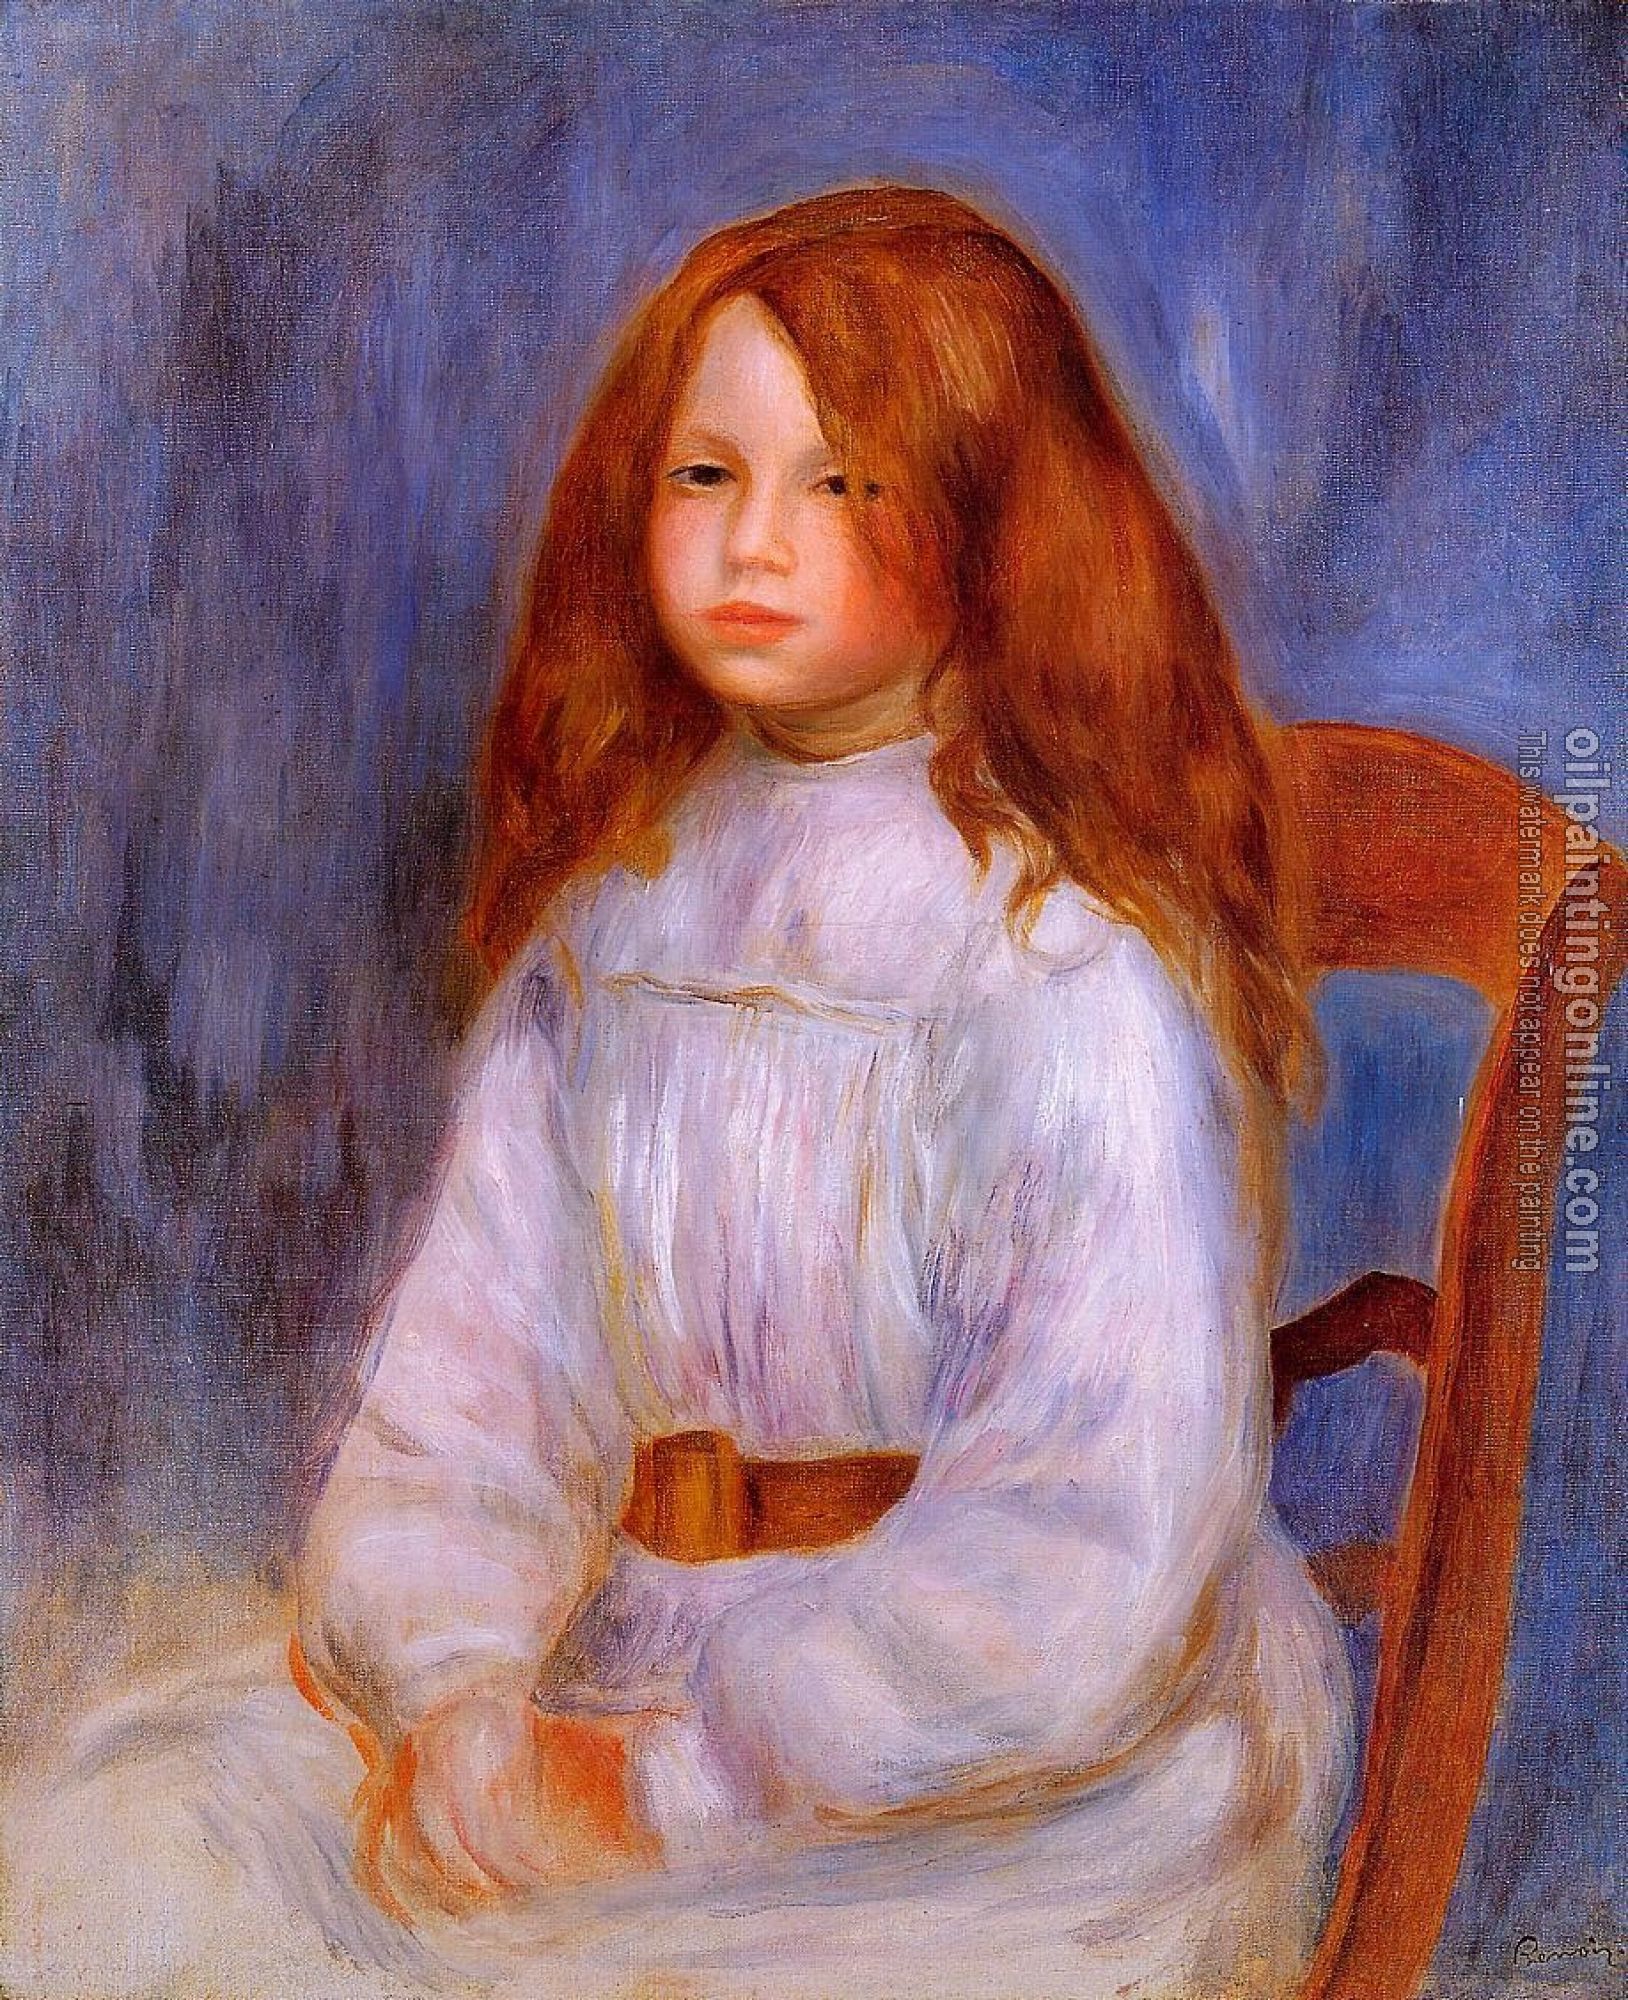 Renoir, Pierre Auguste - Seated Girl with Blue Background